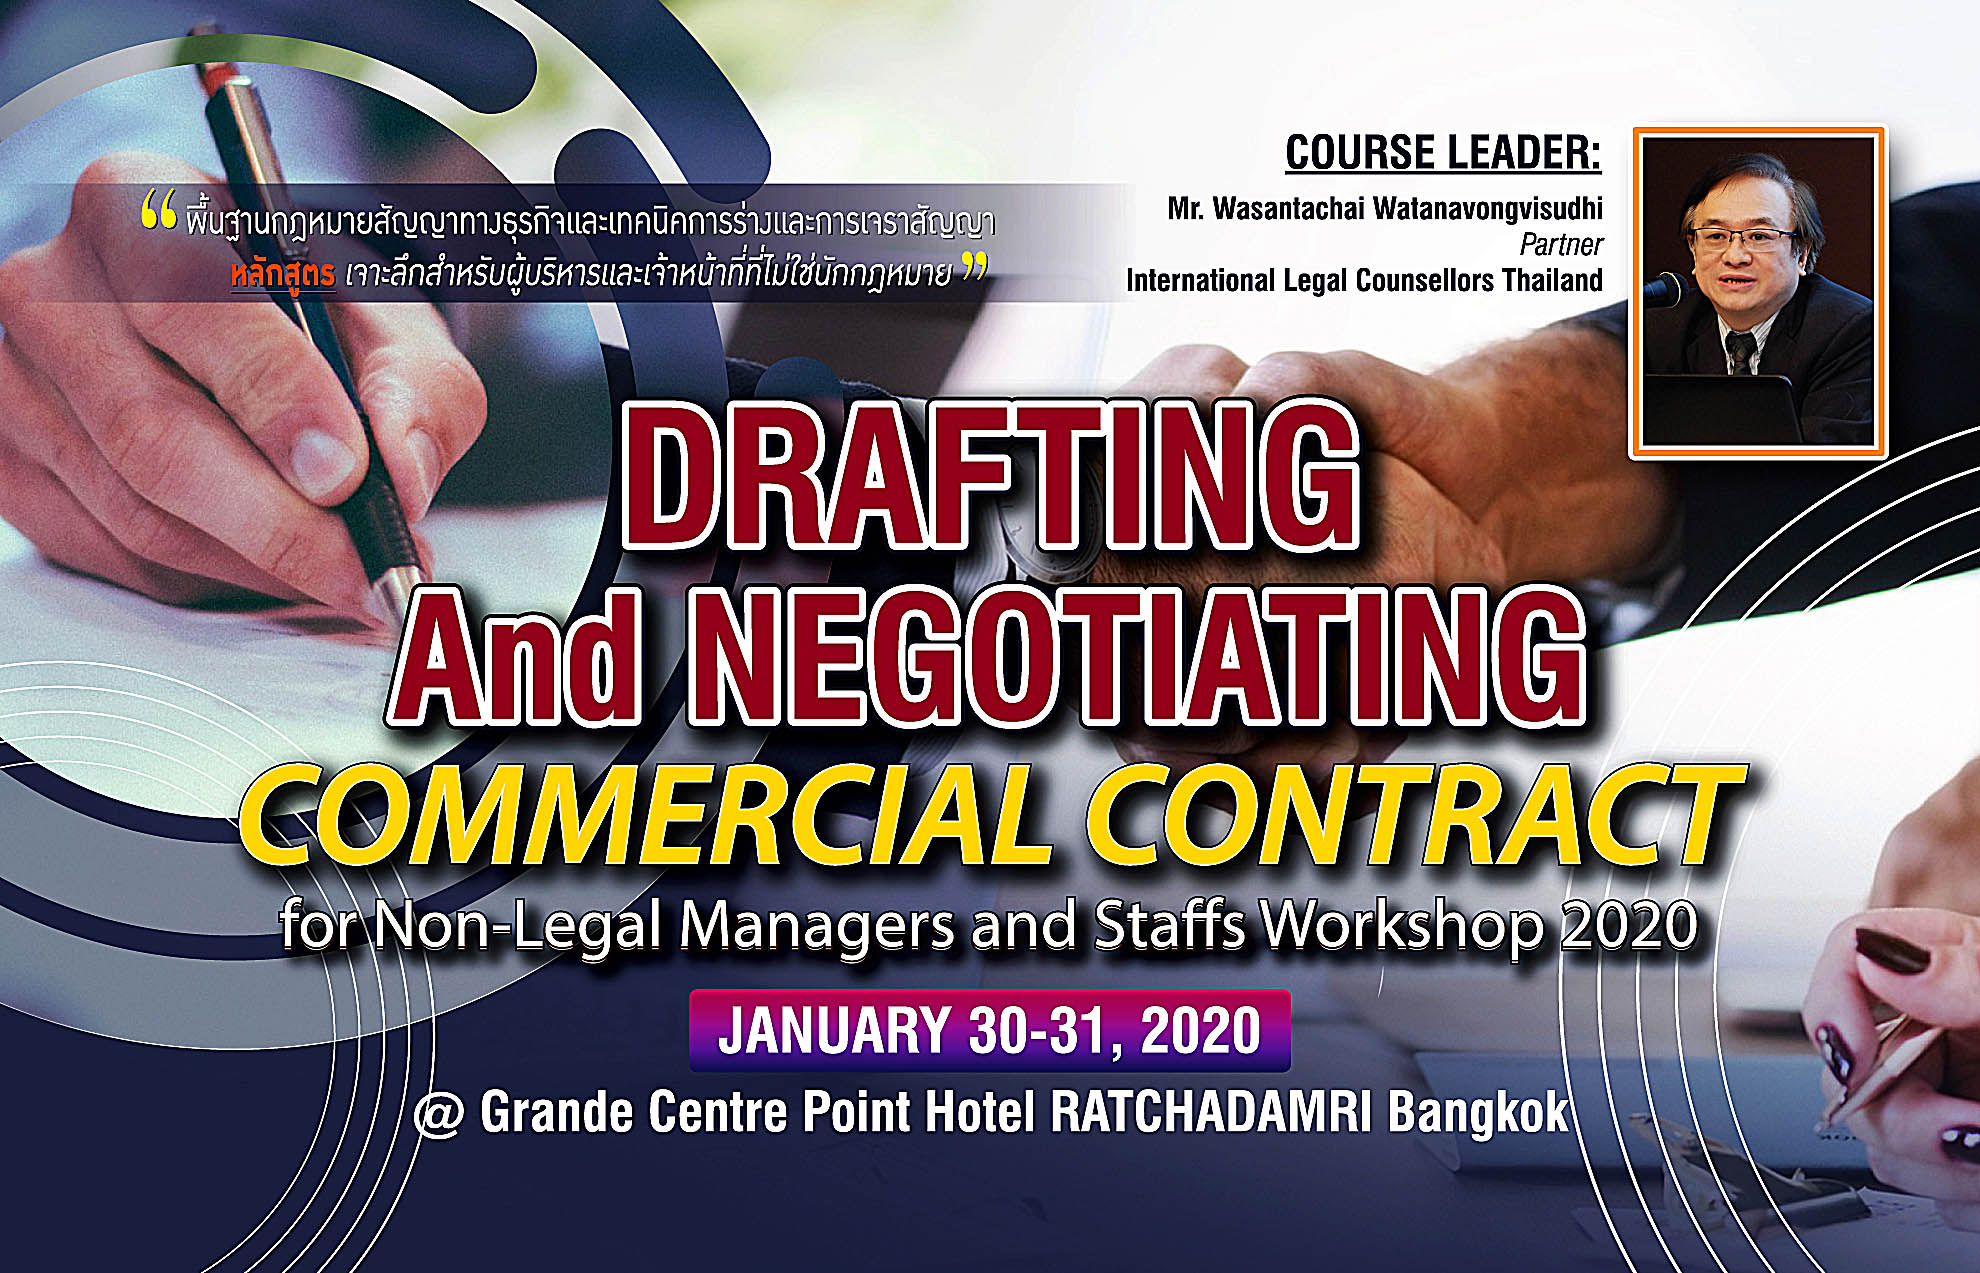 Drafting & Negotiating Commercial Contract For Non-Legal Managers and Staffs Workshop 2020